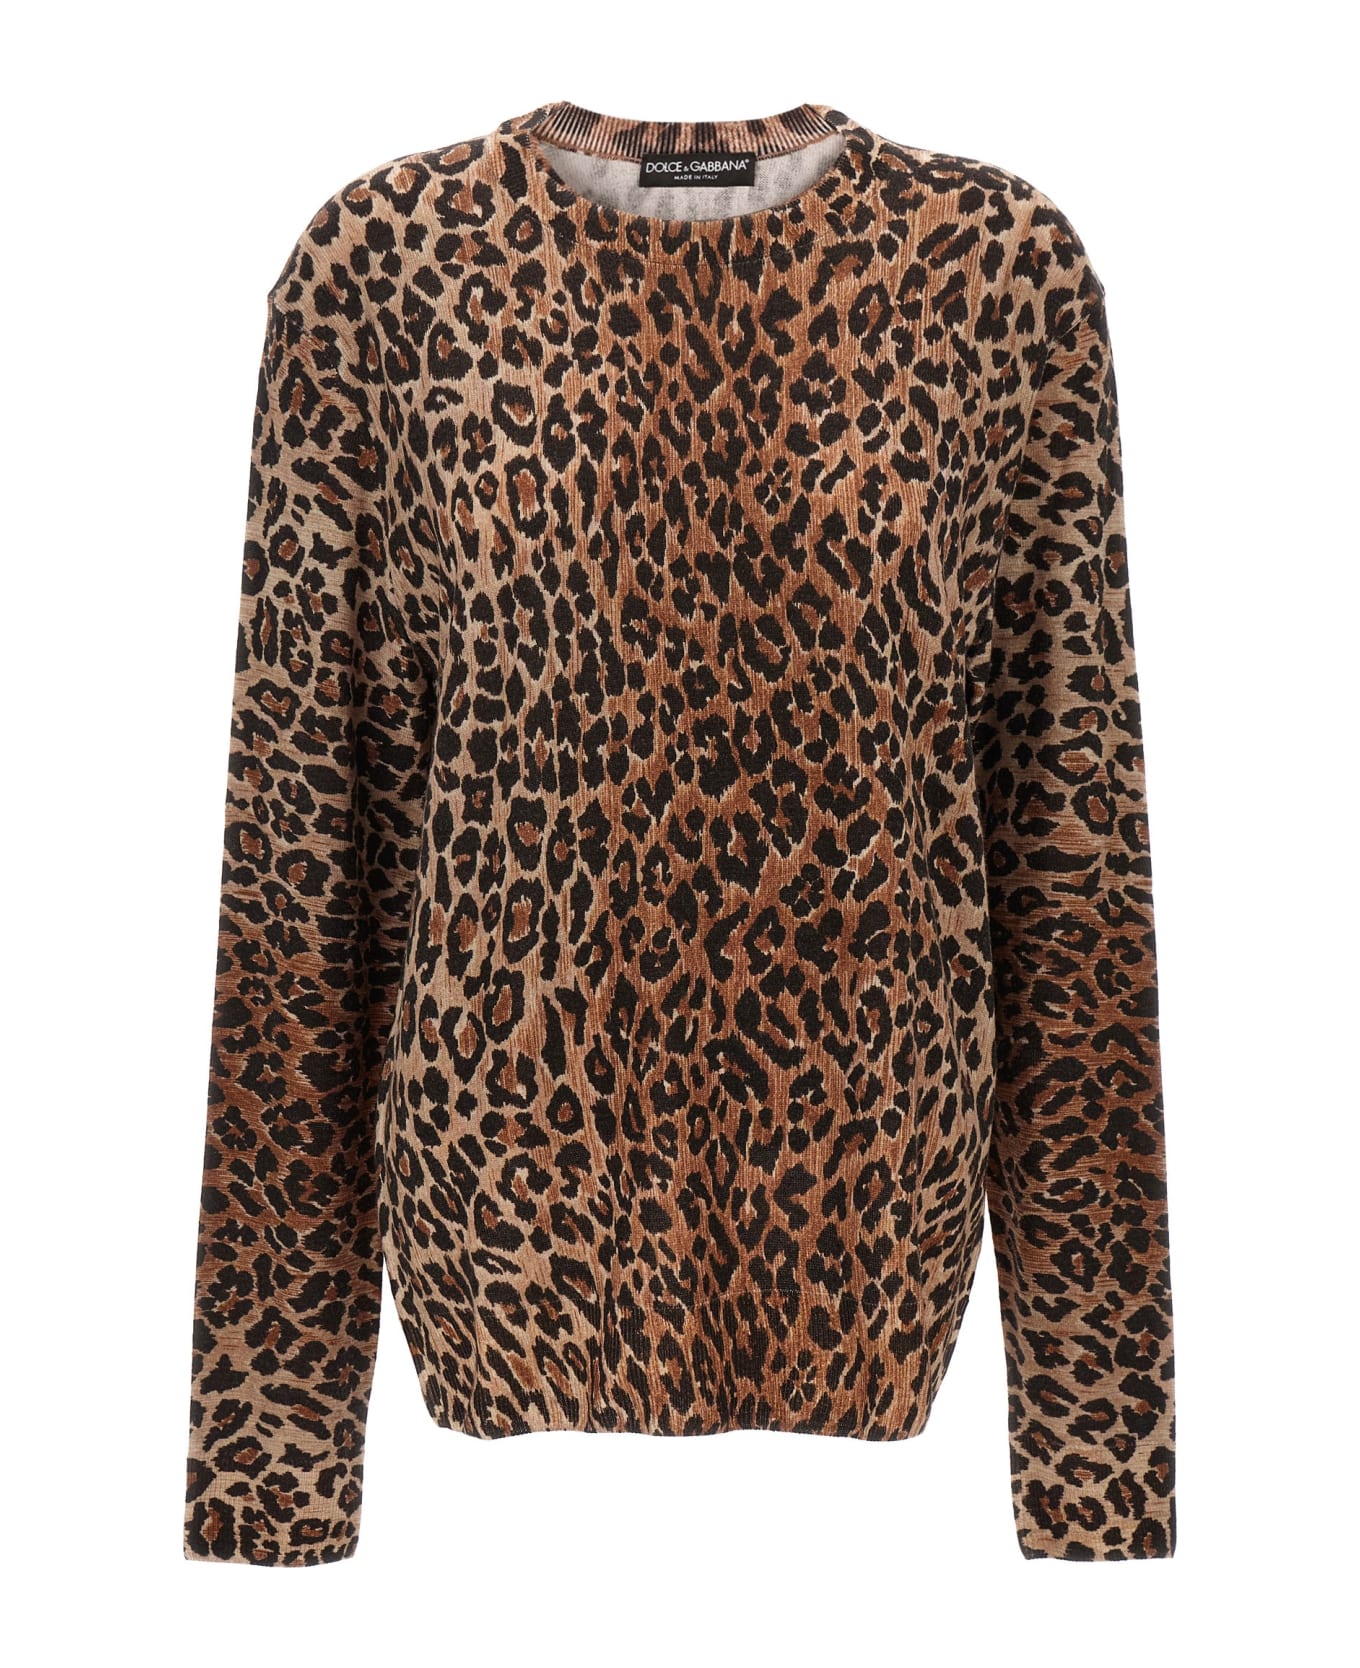 Dolce & Gabbana 're-edition' Wool Sweater - Multicolor